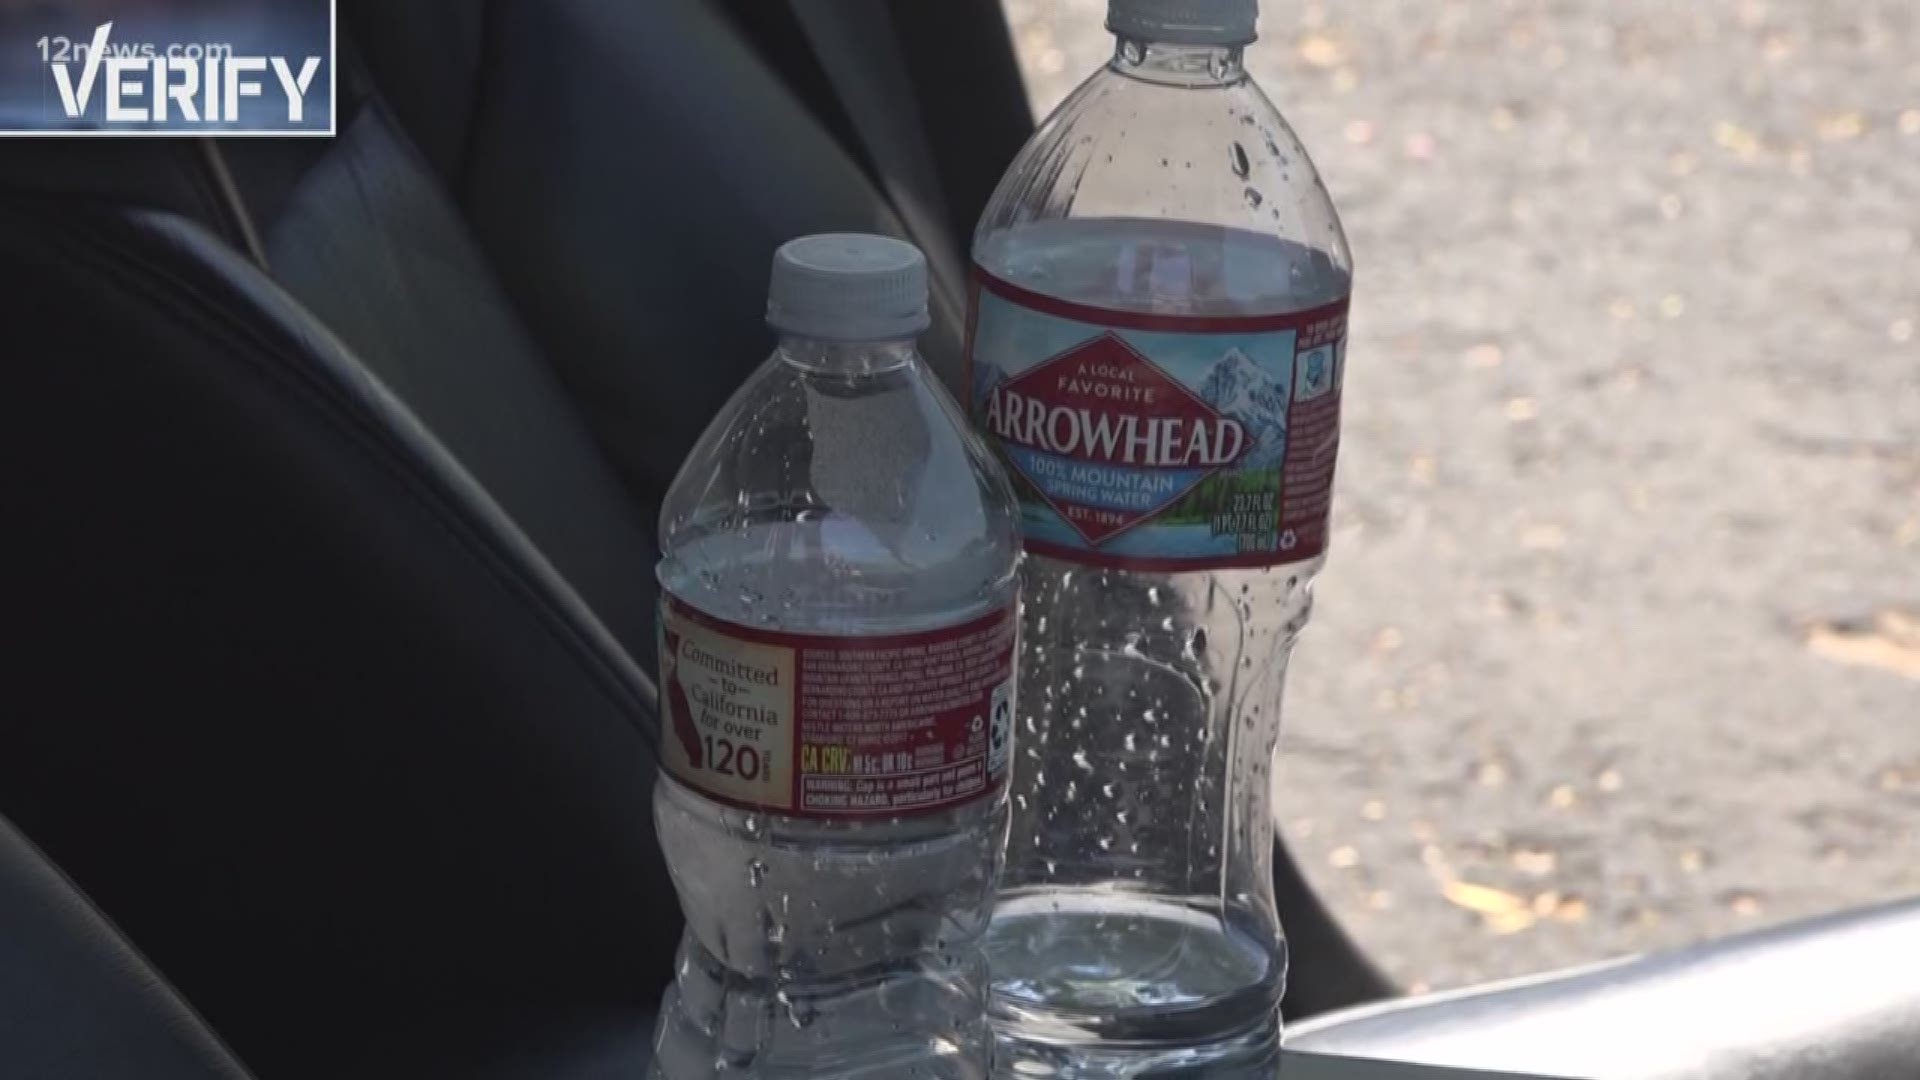 We verify if water bottles in hot cars can catch fire, and if they are toxic!